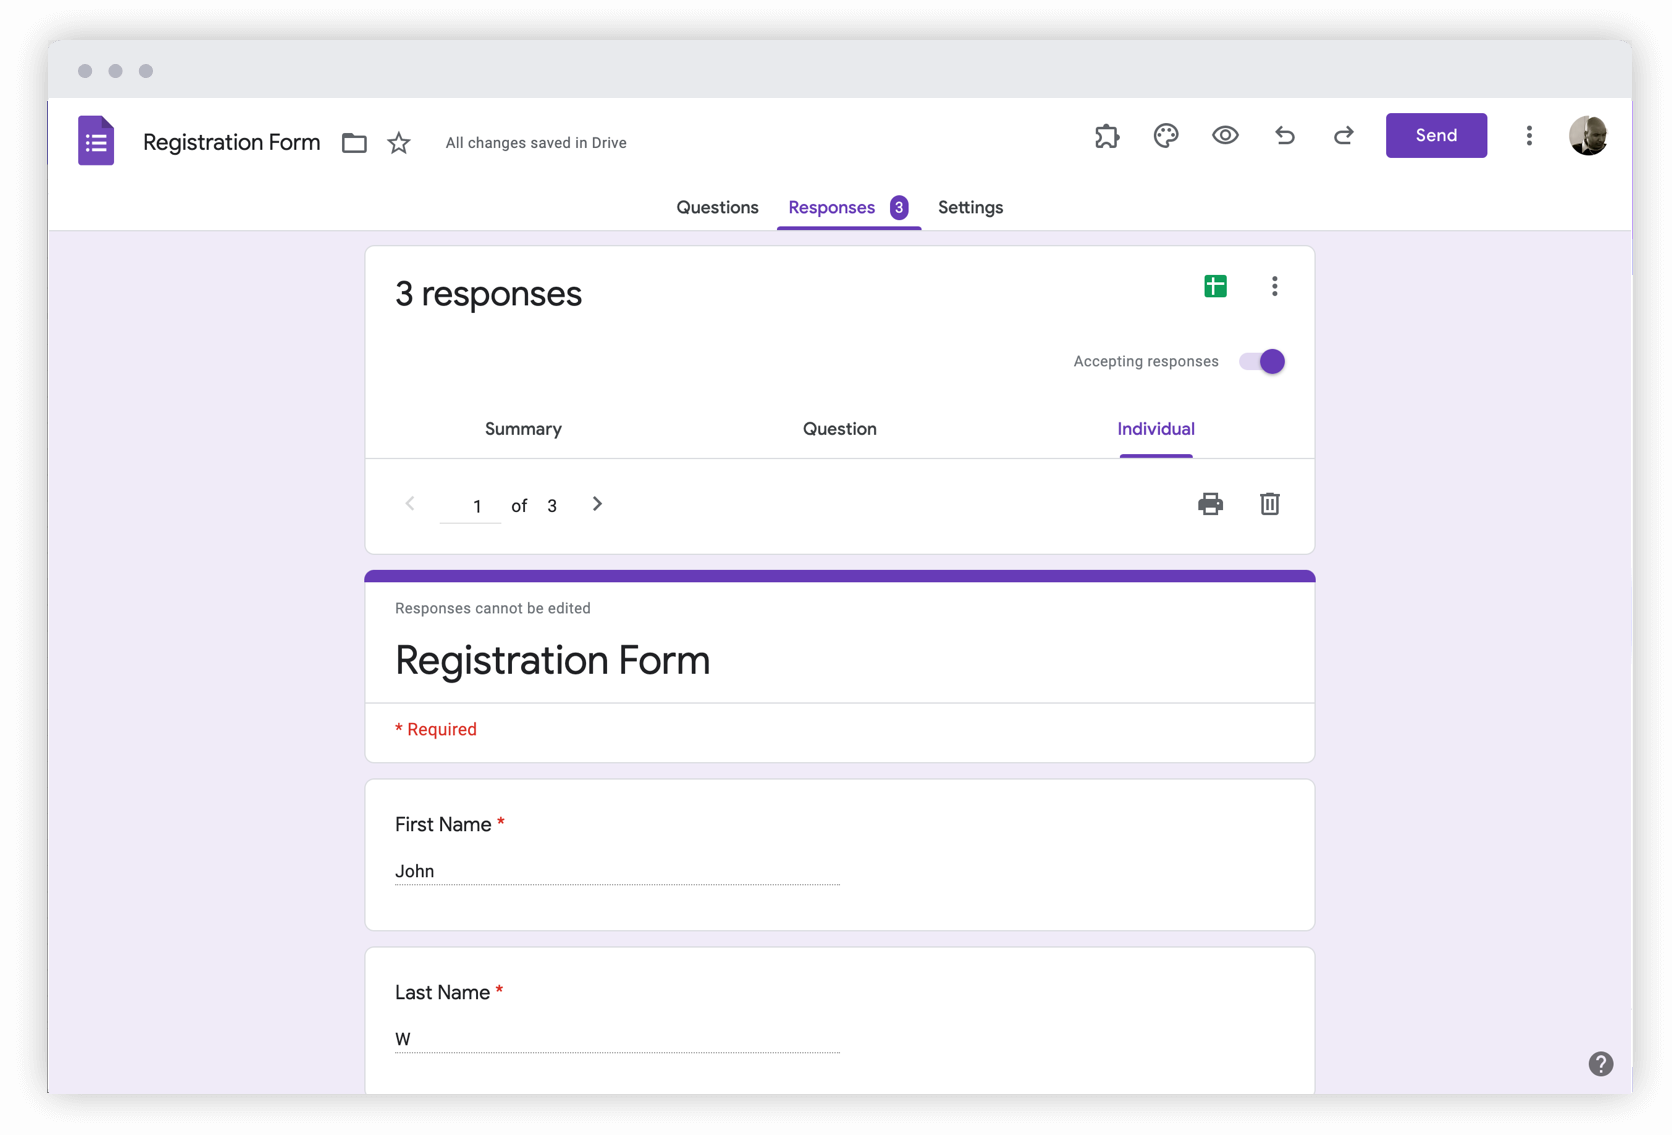 View forms responses by question, person, or summary of the form responses in Google Forms